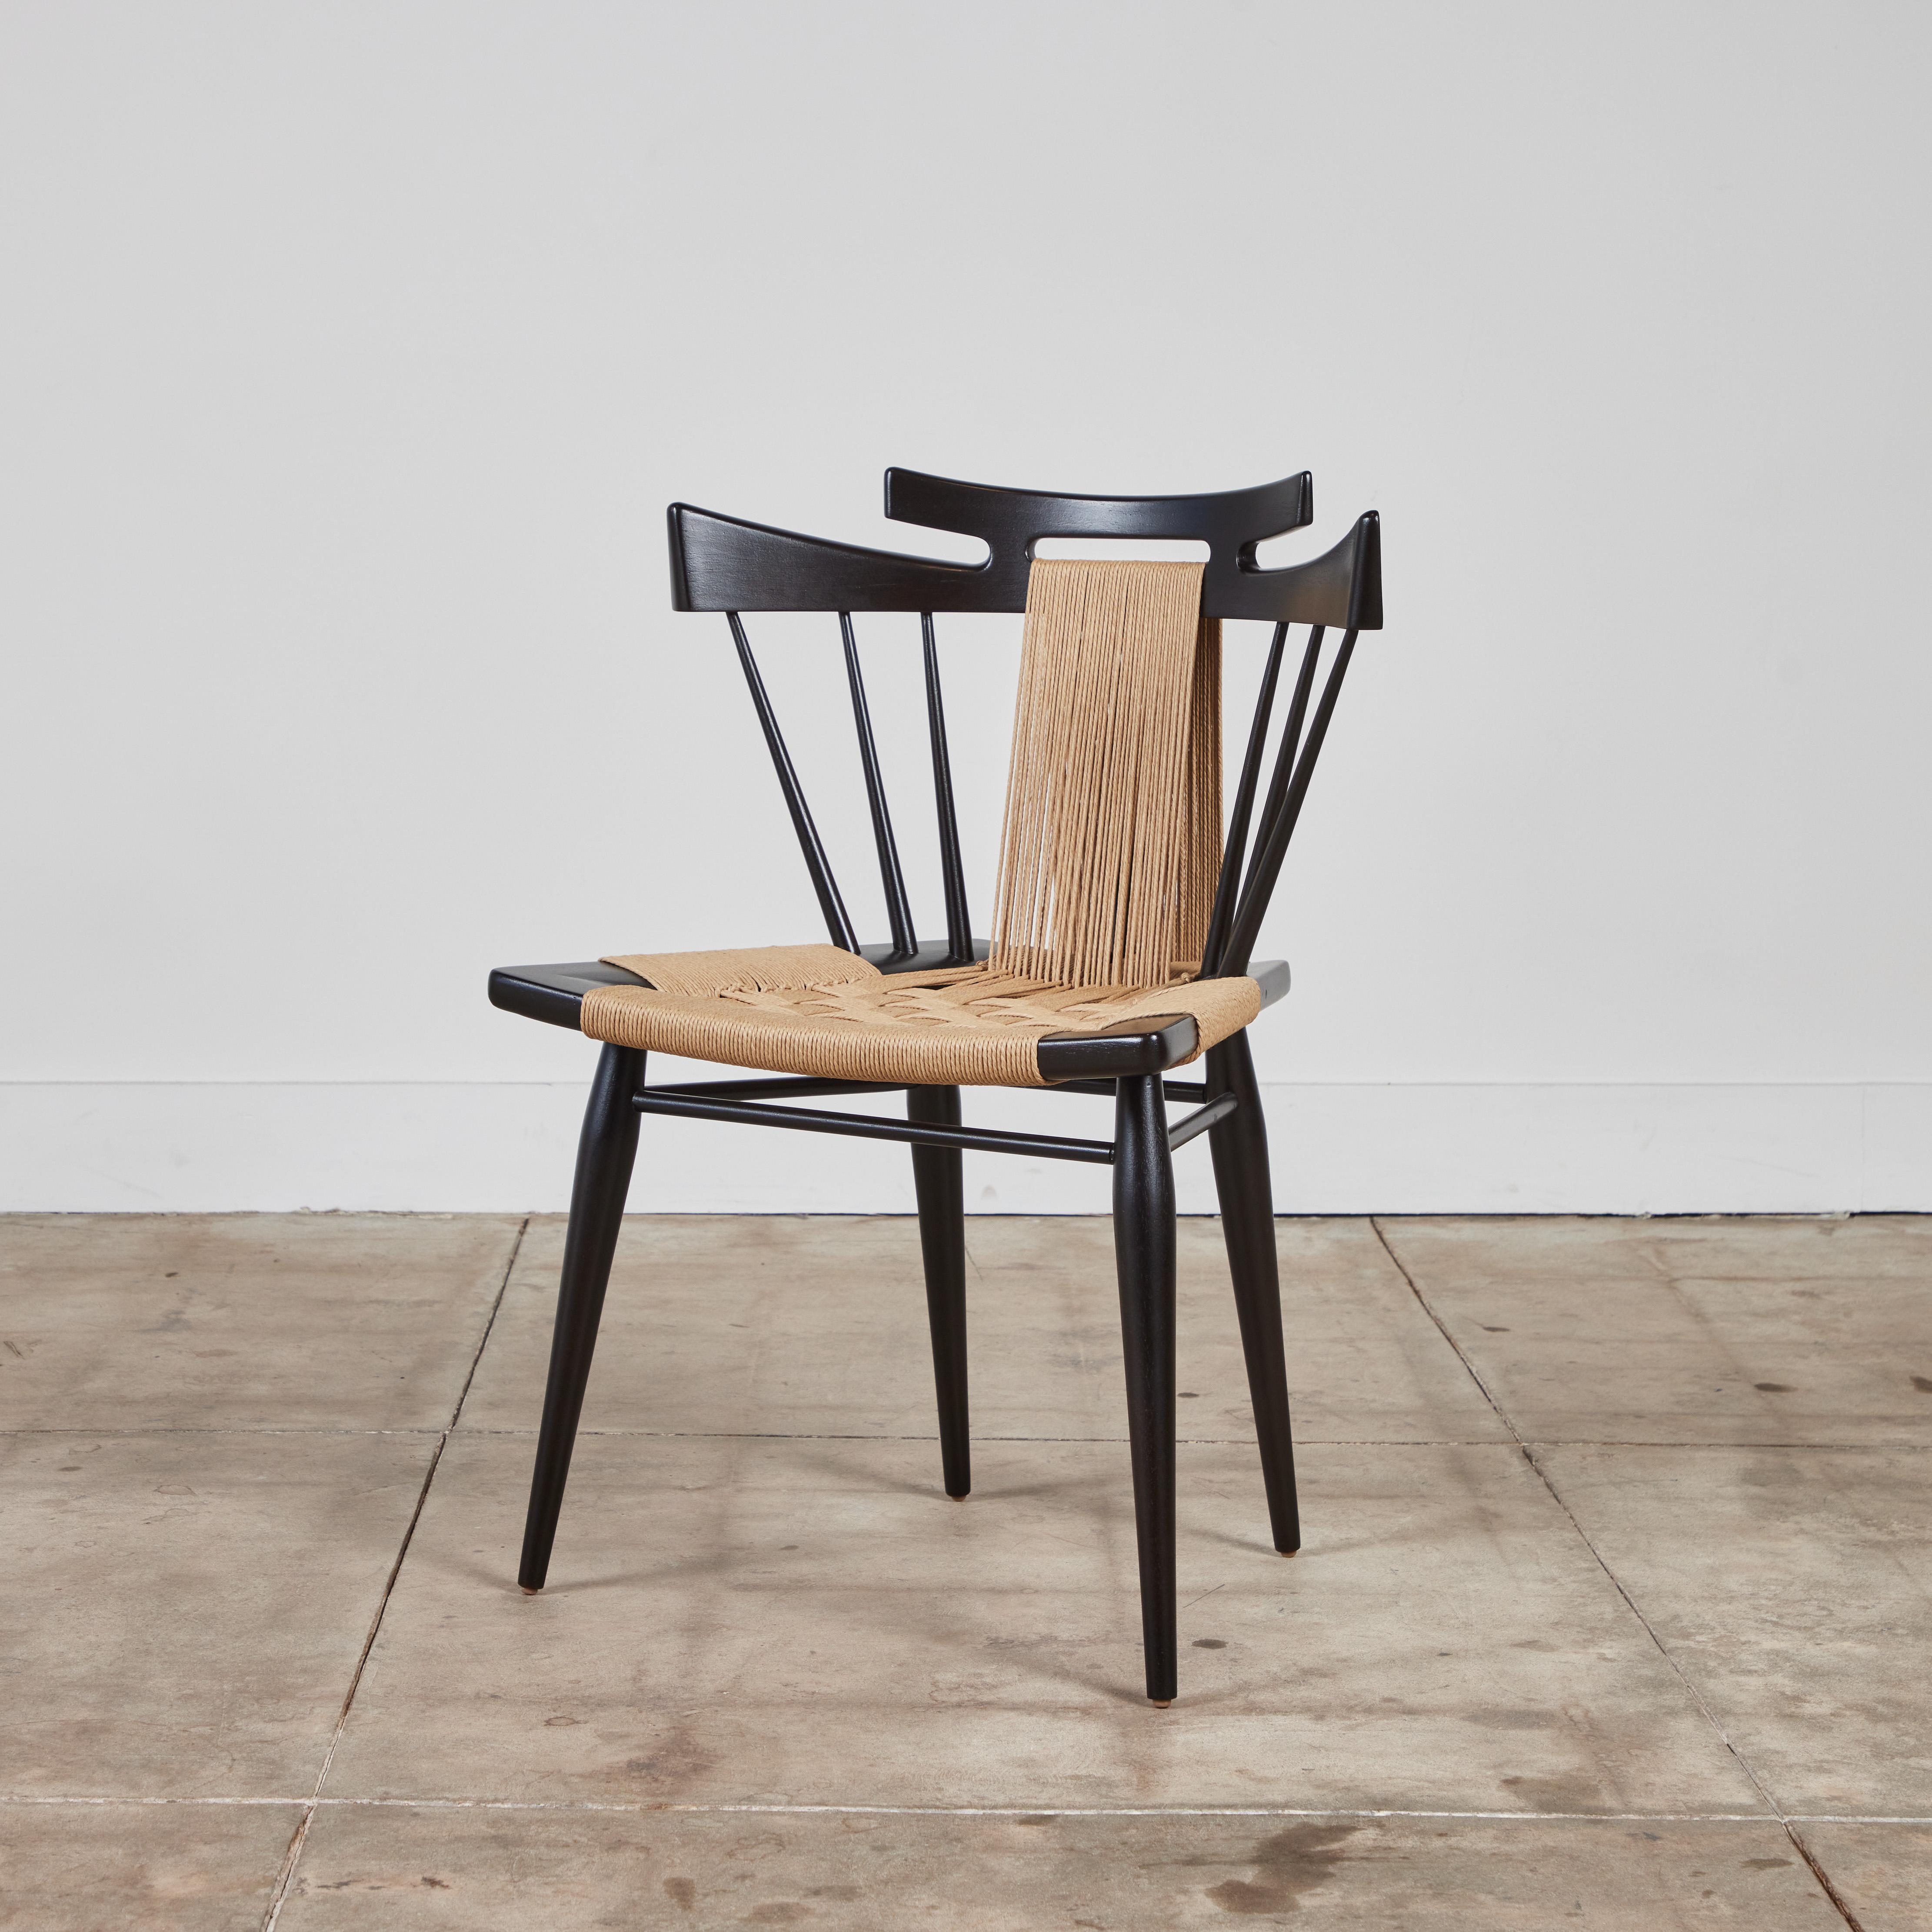 “Yucatan” chair by Edmond Spence for Industria Mueblera in Mexico, c.1950s. The chair features a unique and hand sculpted Japanese-inspired interpretation of a traditional spindle back chair similar to the shape of Paul McCobb’s Planner Group chair